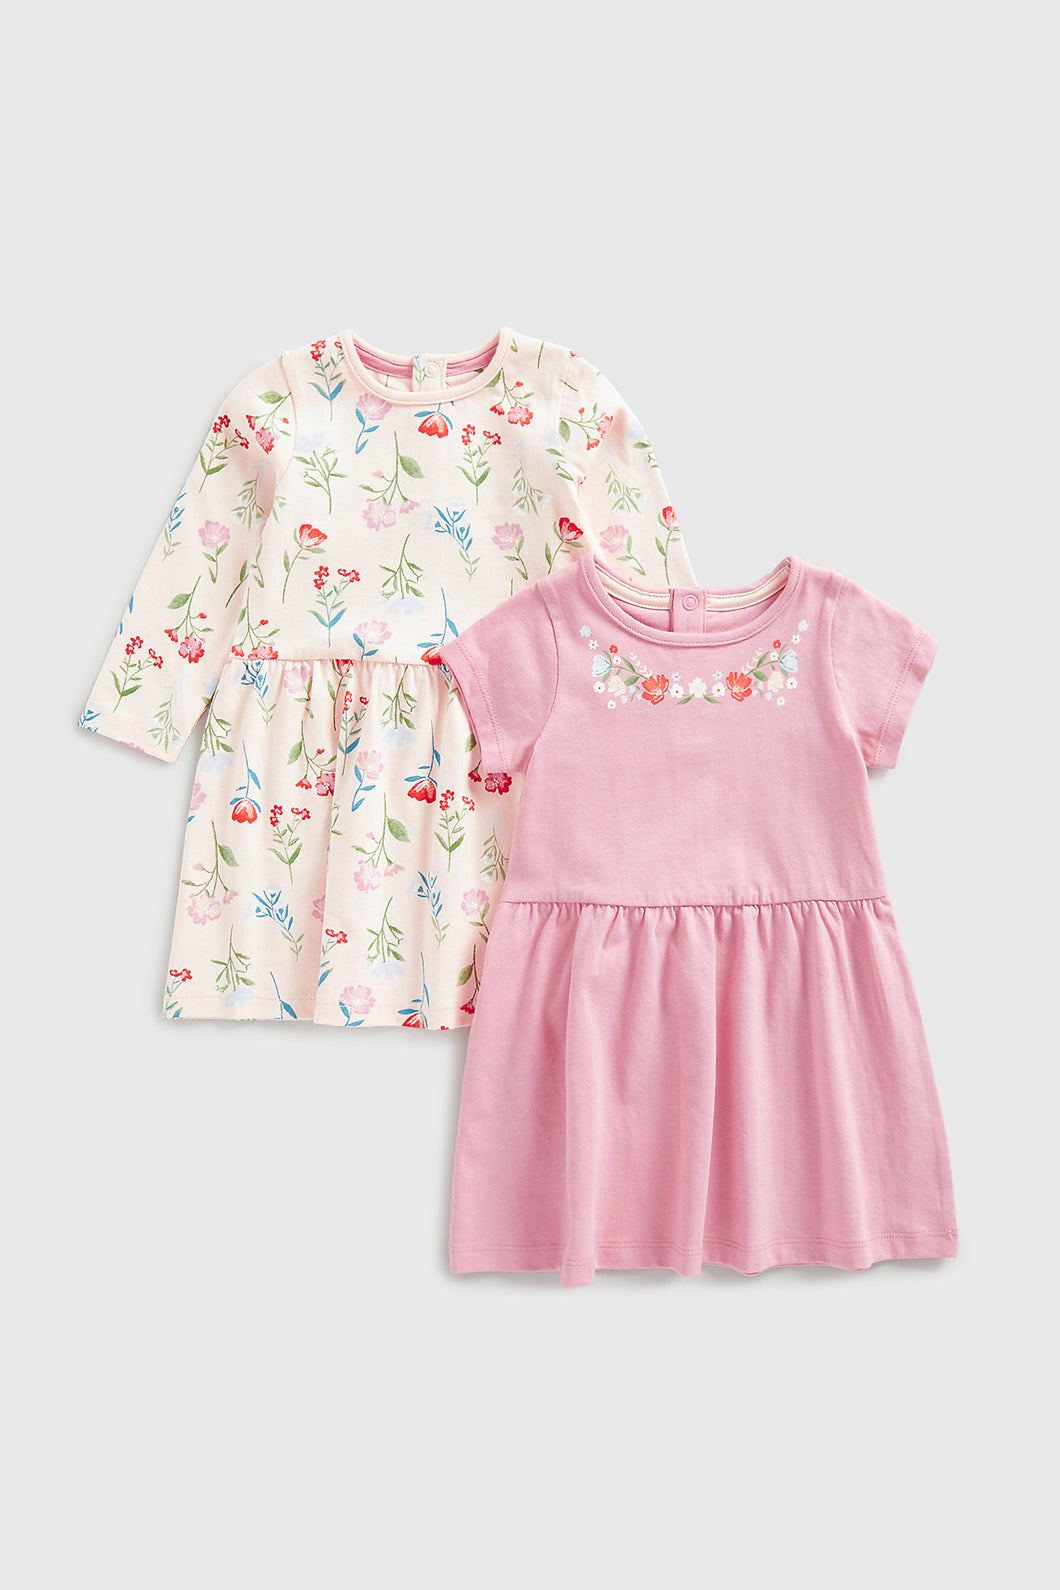 Mothercare Pink Floral Jersey Dresses - 2 Pack